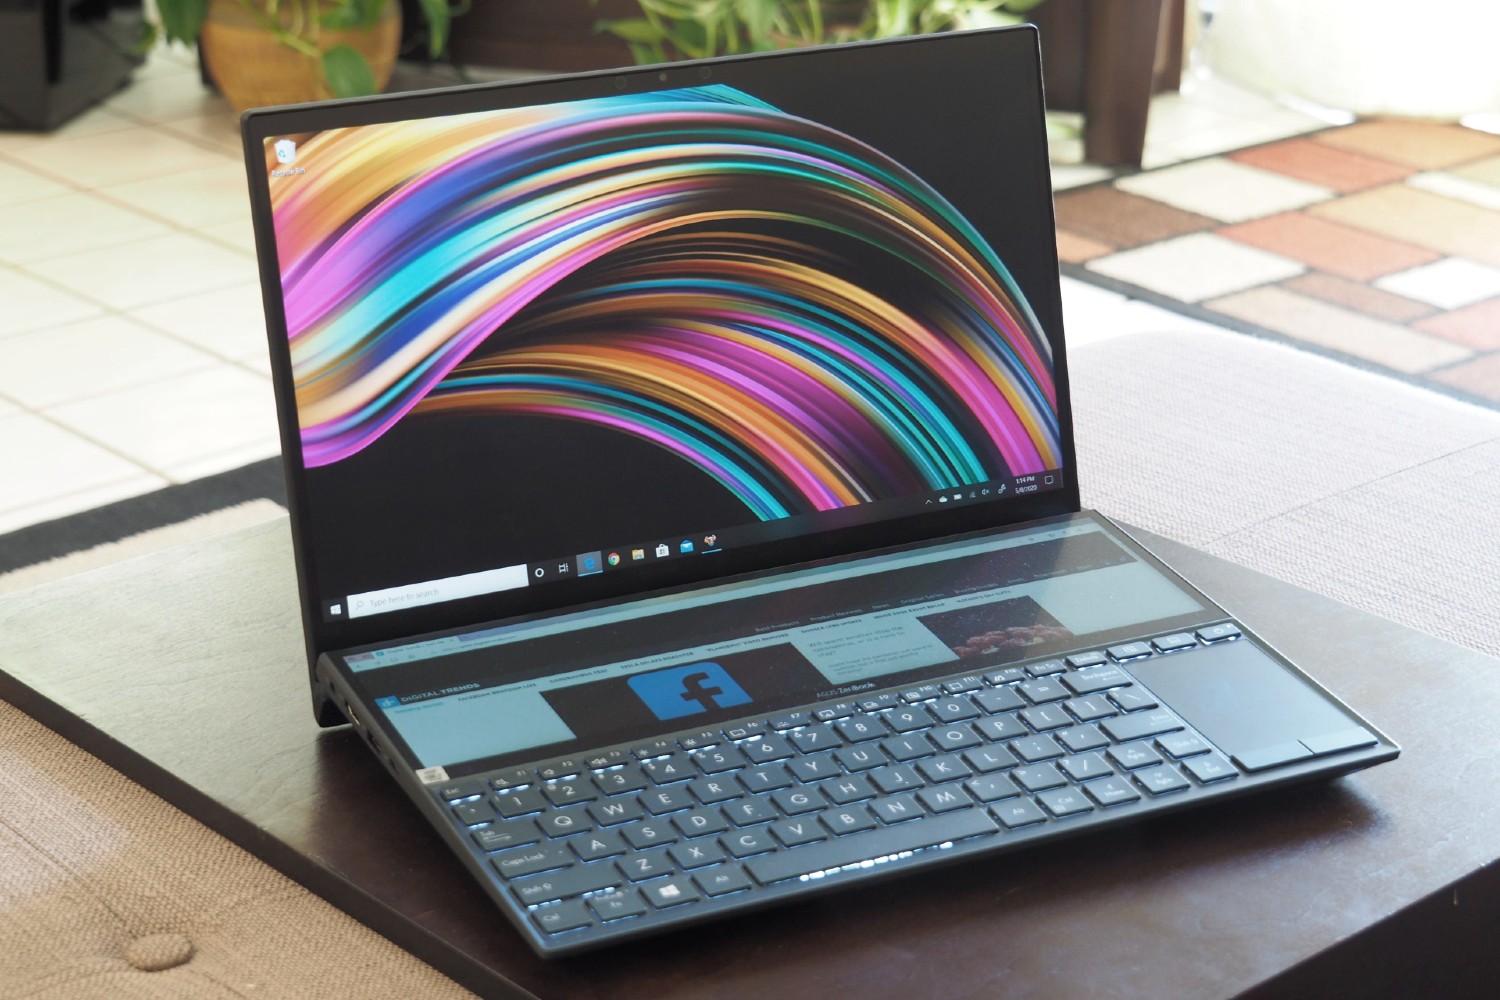 Asus Zenbook Duo UX481 review: An artist's almost perfect dream